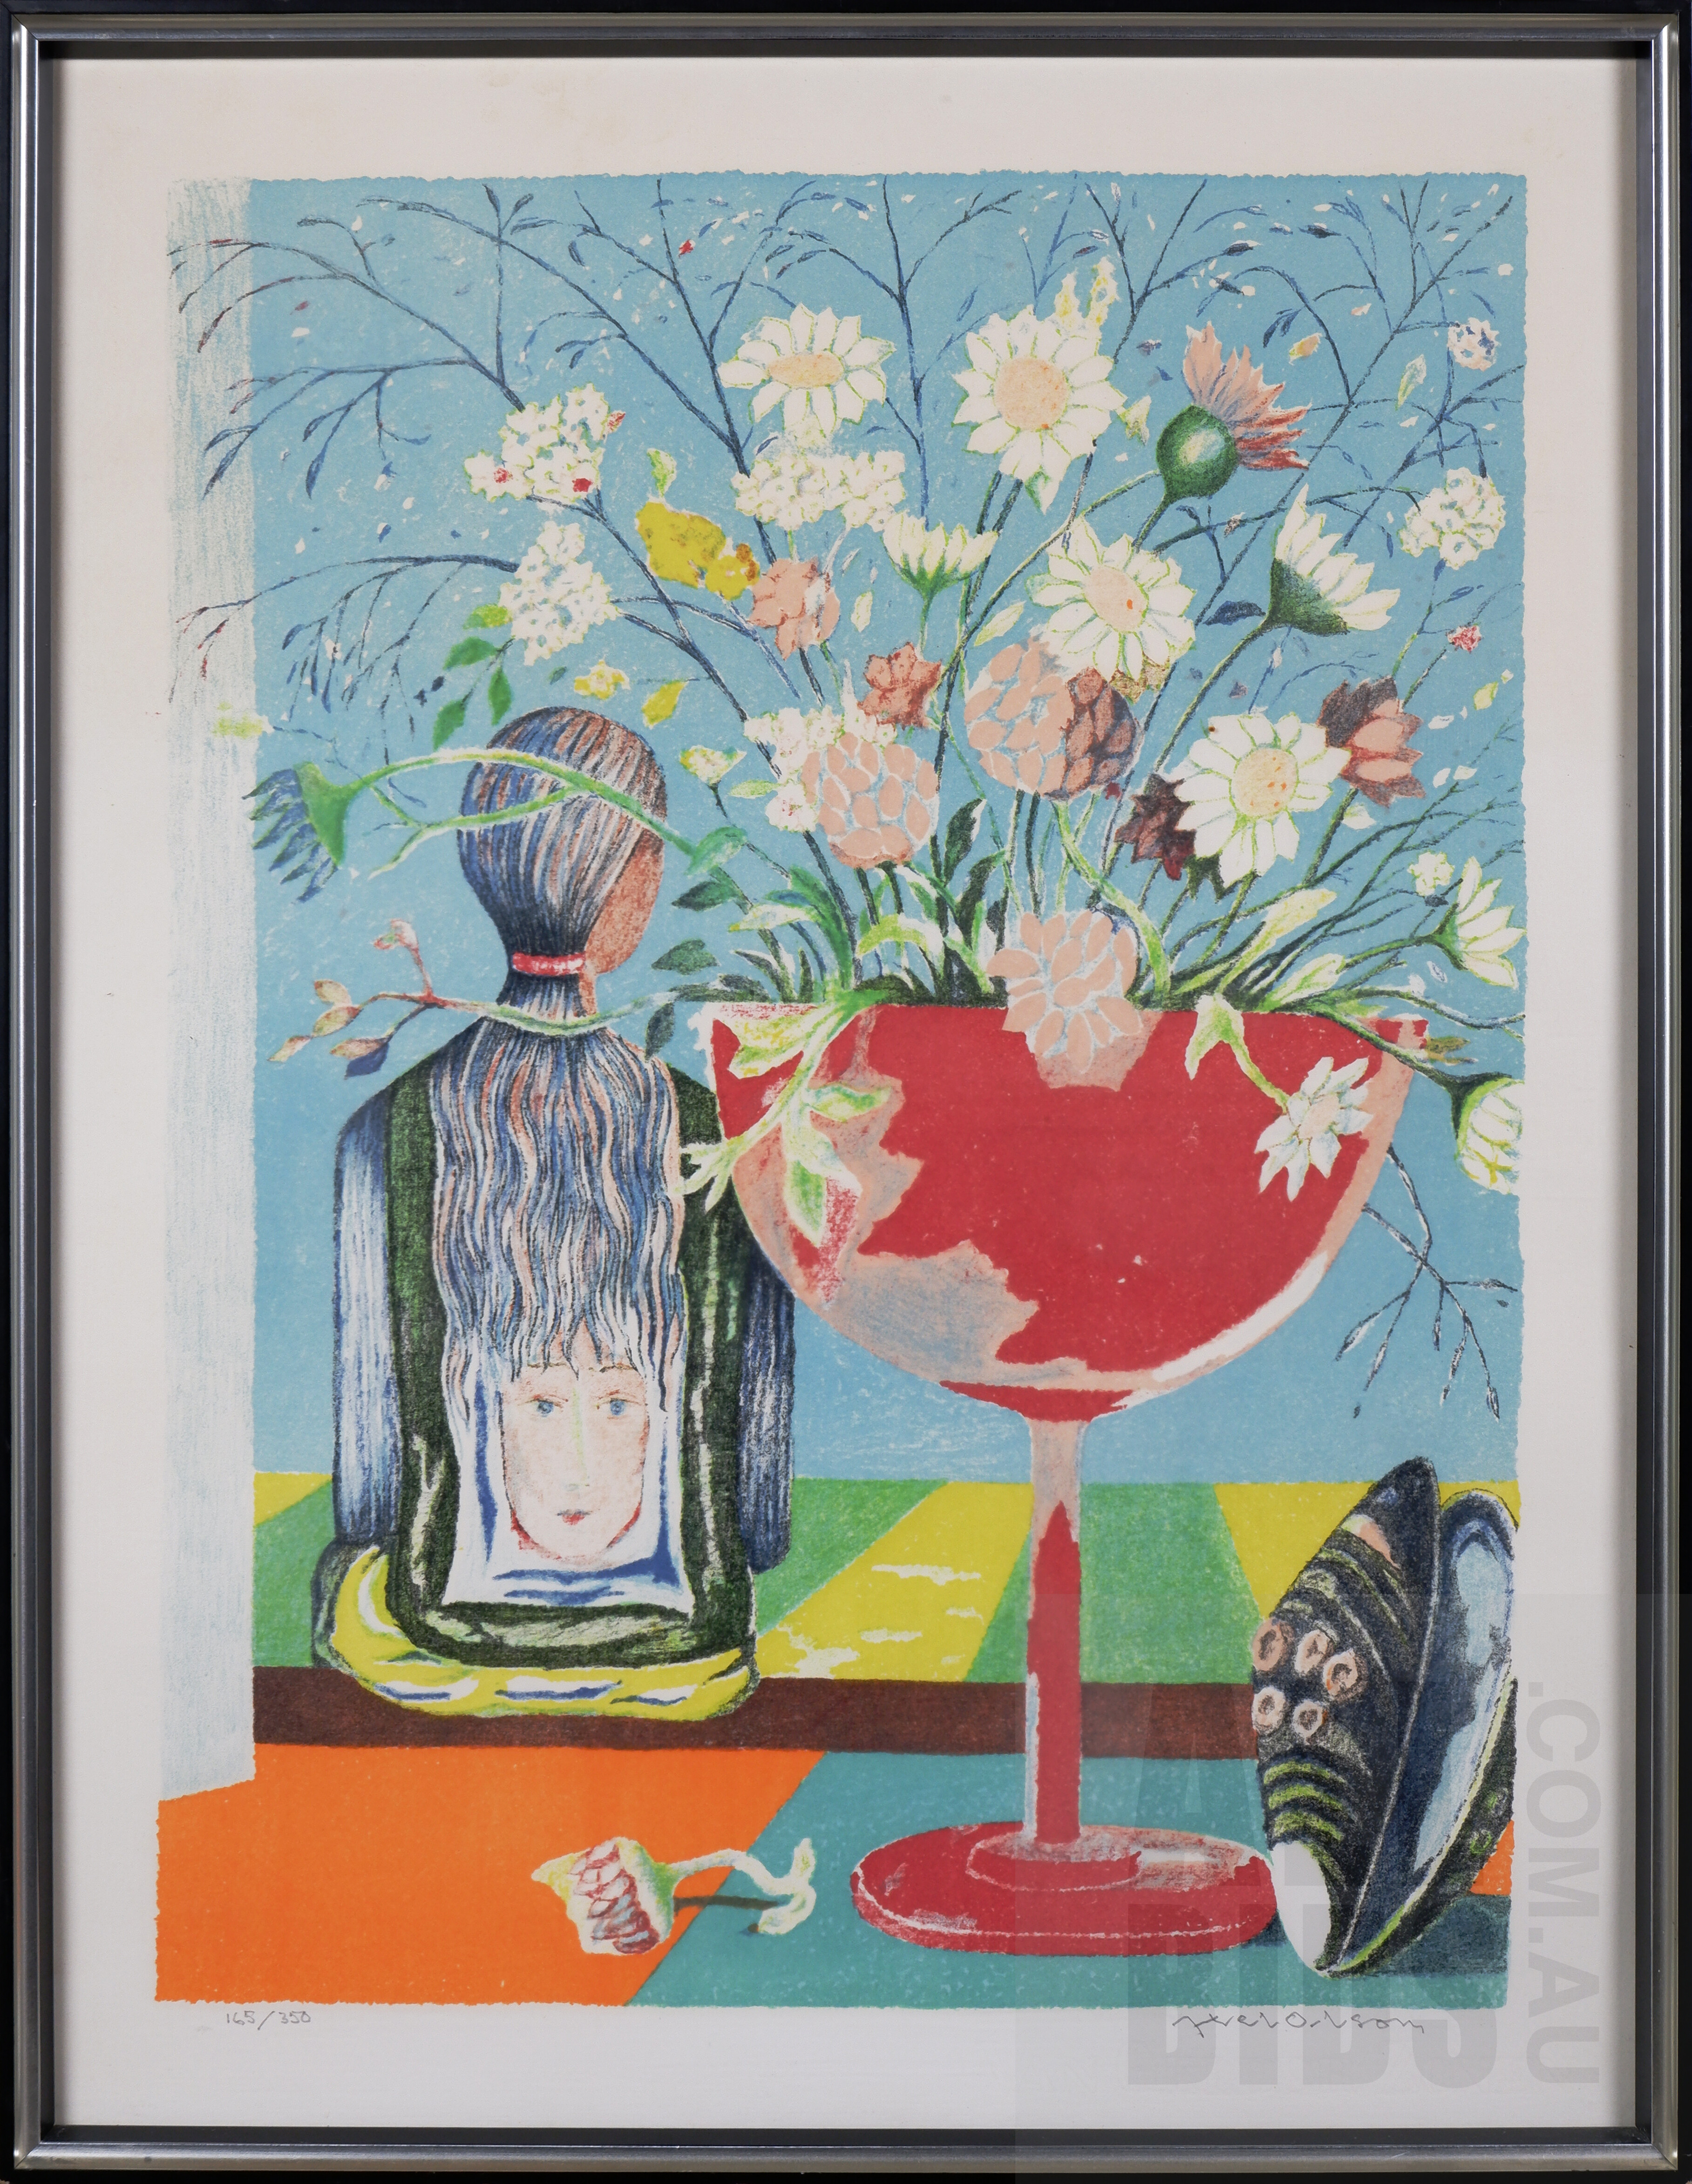 'Axel Olson (1901-1981, Swedish - Halmstad Group), Summer Bouquet, Colour Lithograph, 52 x 67cm (incl. frame)'